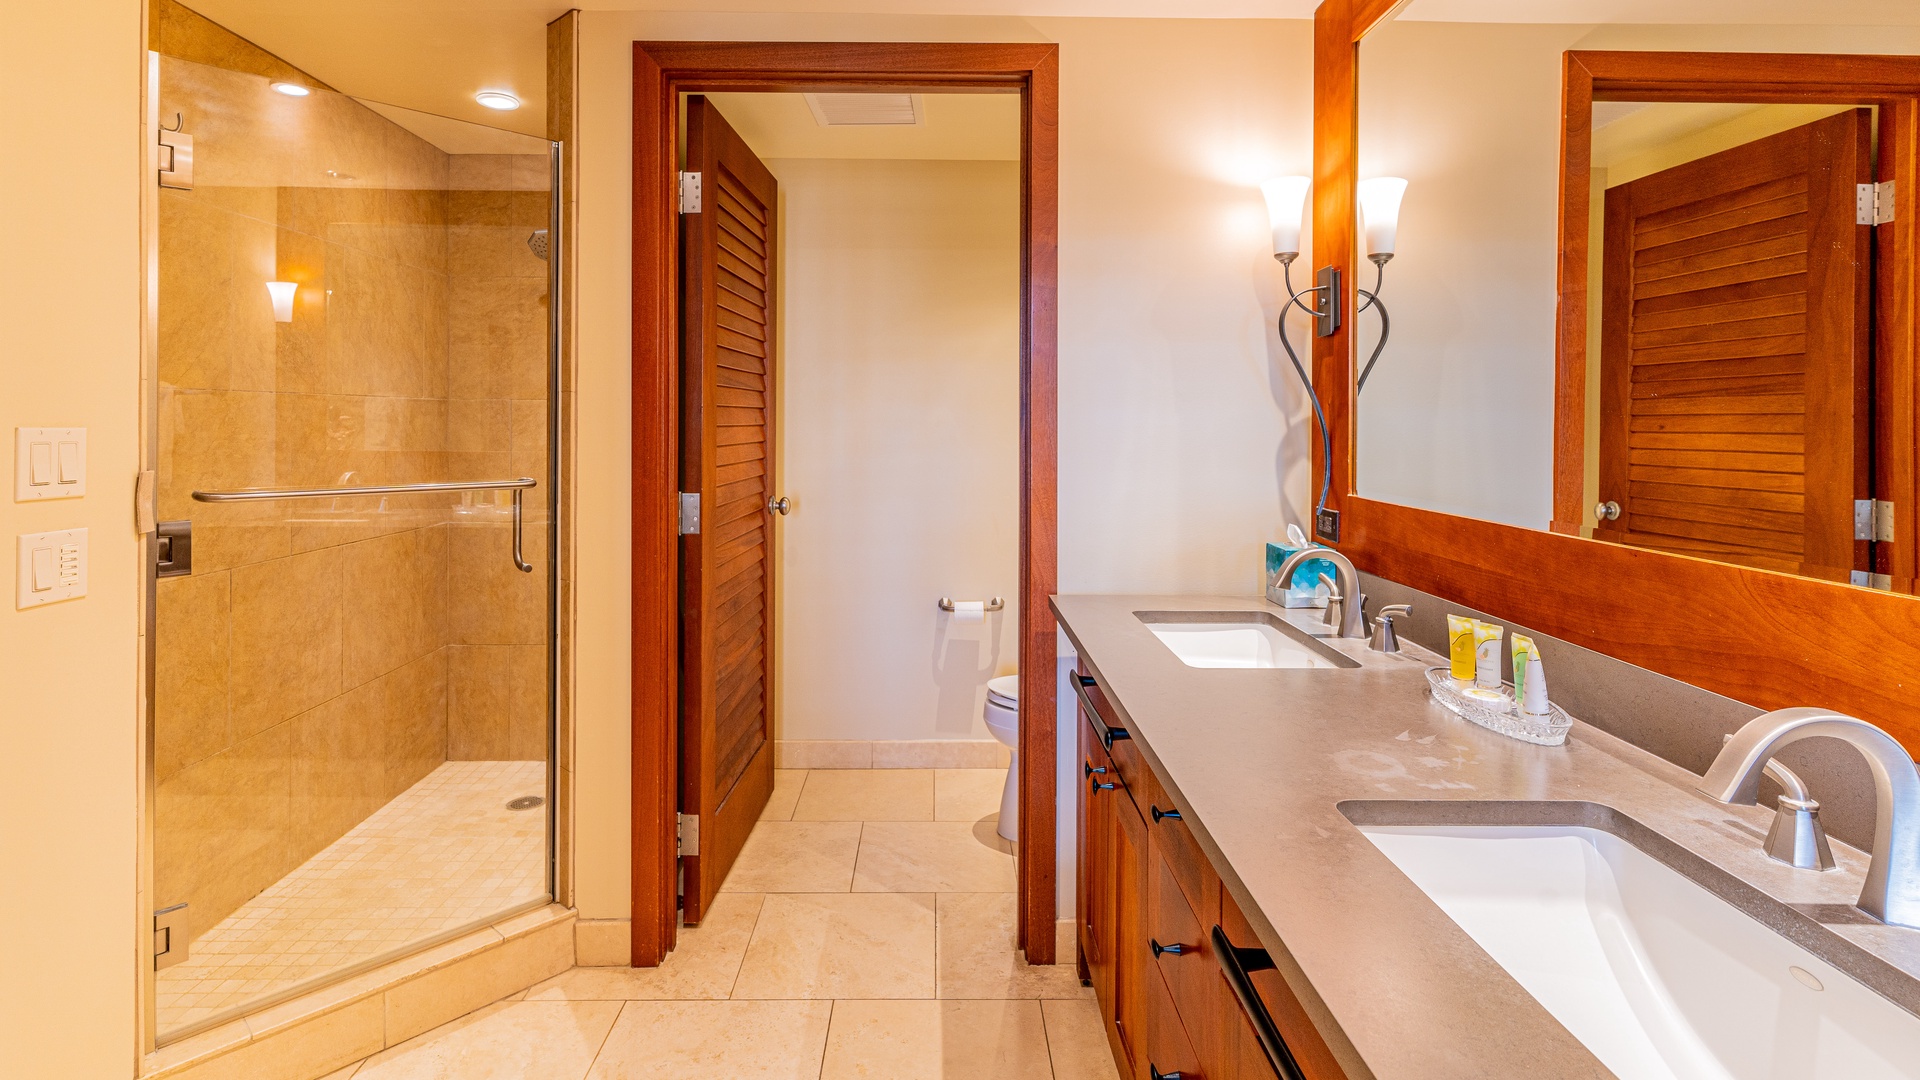 Kapolei Vacation Rentals, Ko Olina Beach Villas B403 - The primary guest bathroom with a walk-in shower and double vanity.